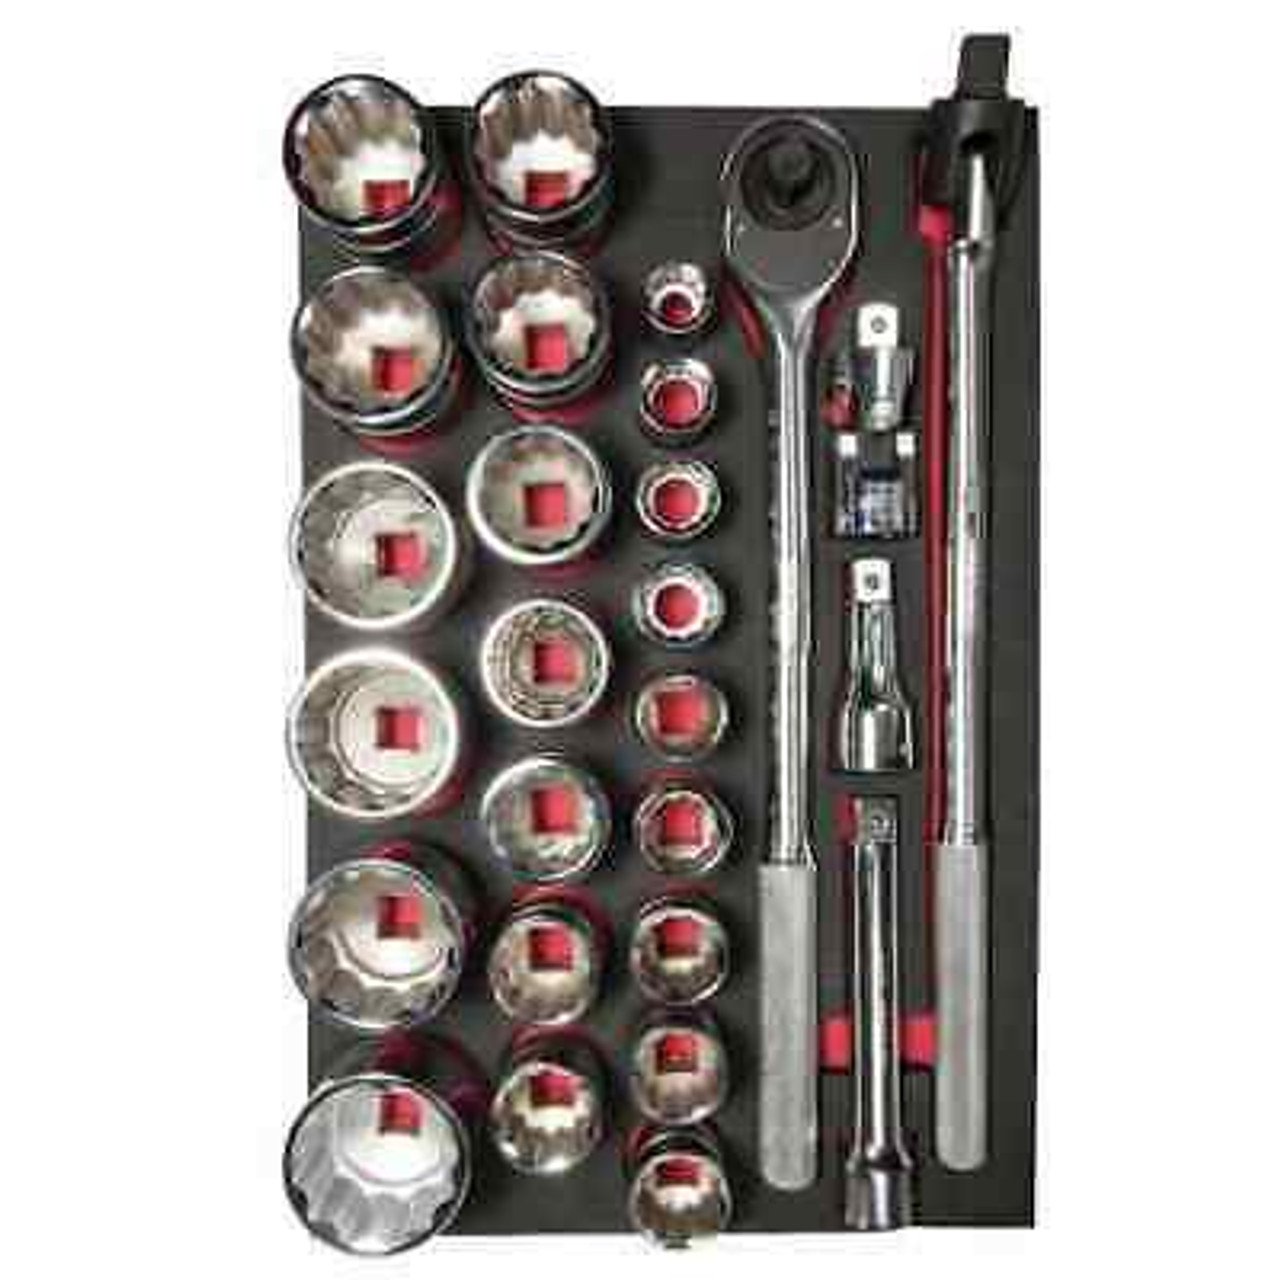 URREA 27 pc 3/4? DRIVE SOCKET SETS WITH ACCESSORIES #CH301